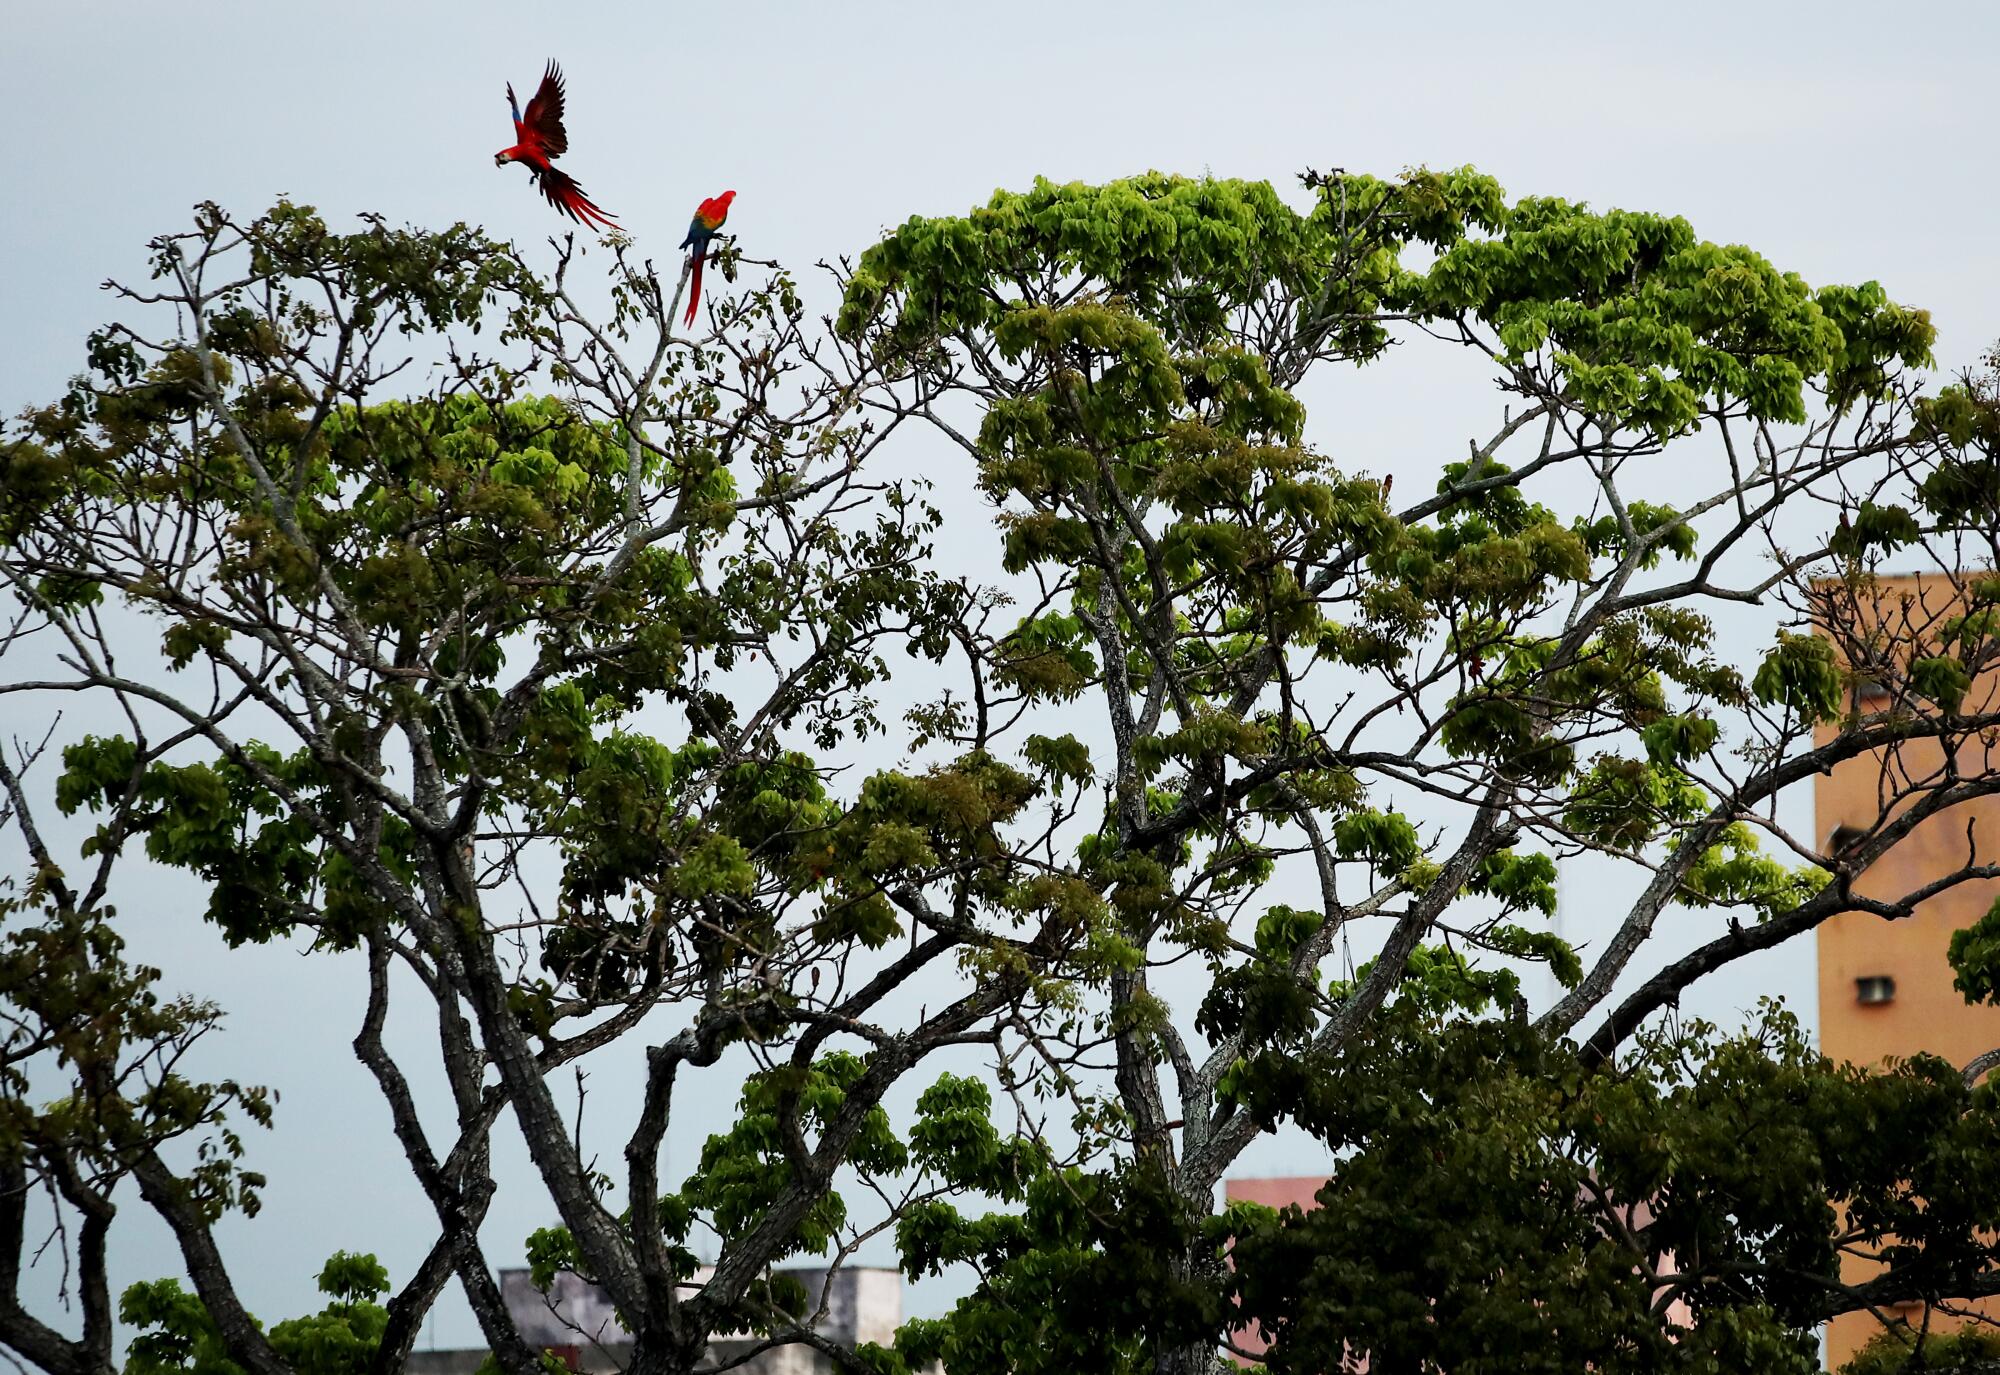 Red birds in a tree in the central square of Manaus